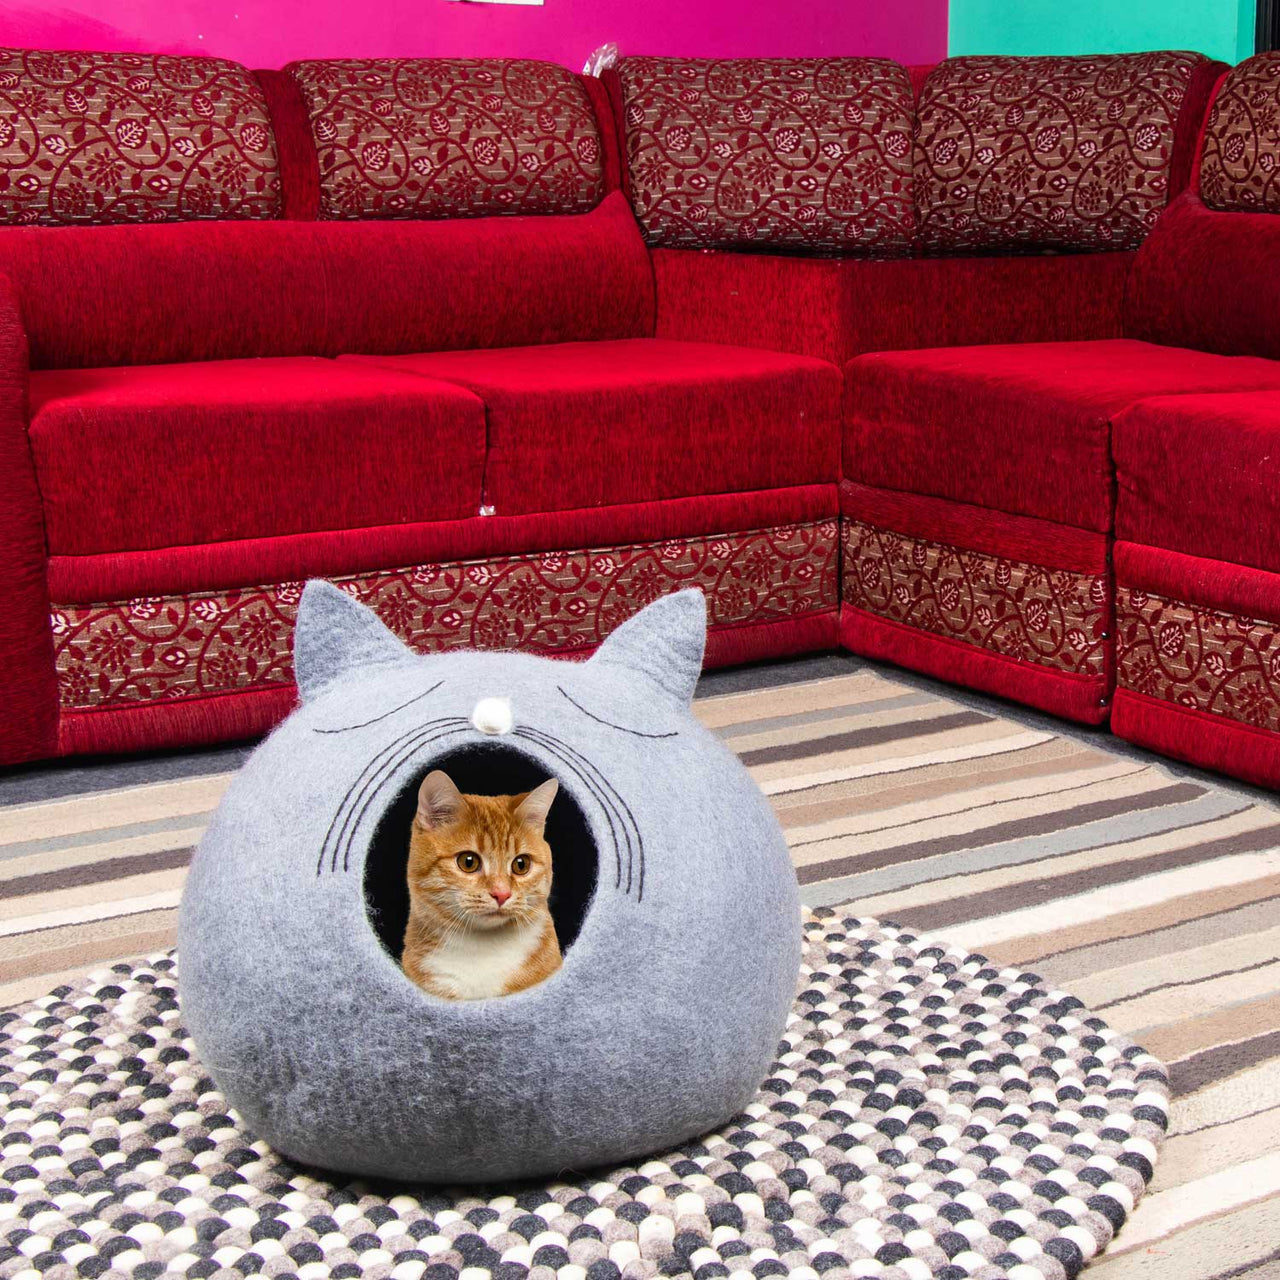 Cat Faced Round Cat House, Felt Cat Cave, Felted Wool Cat Cave Bed